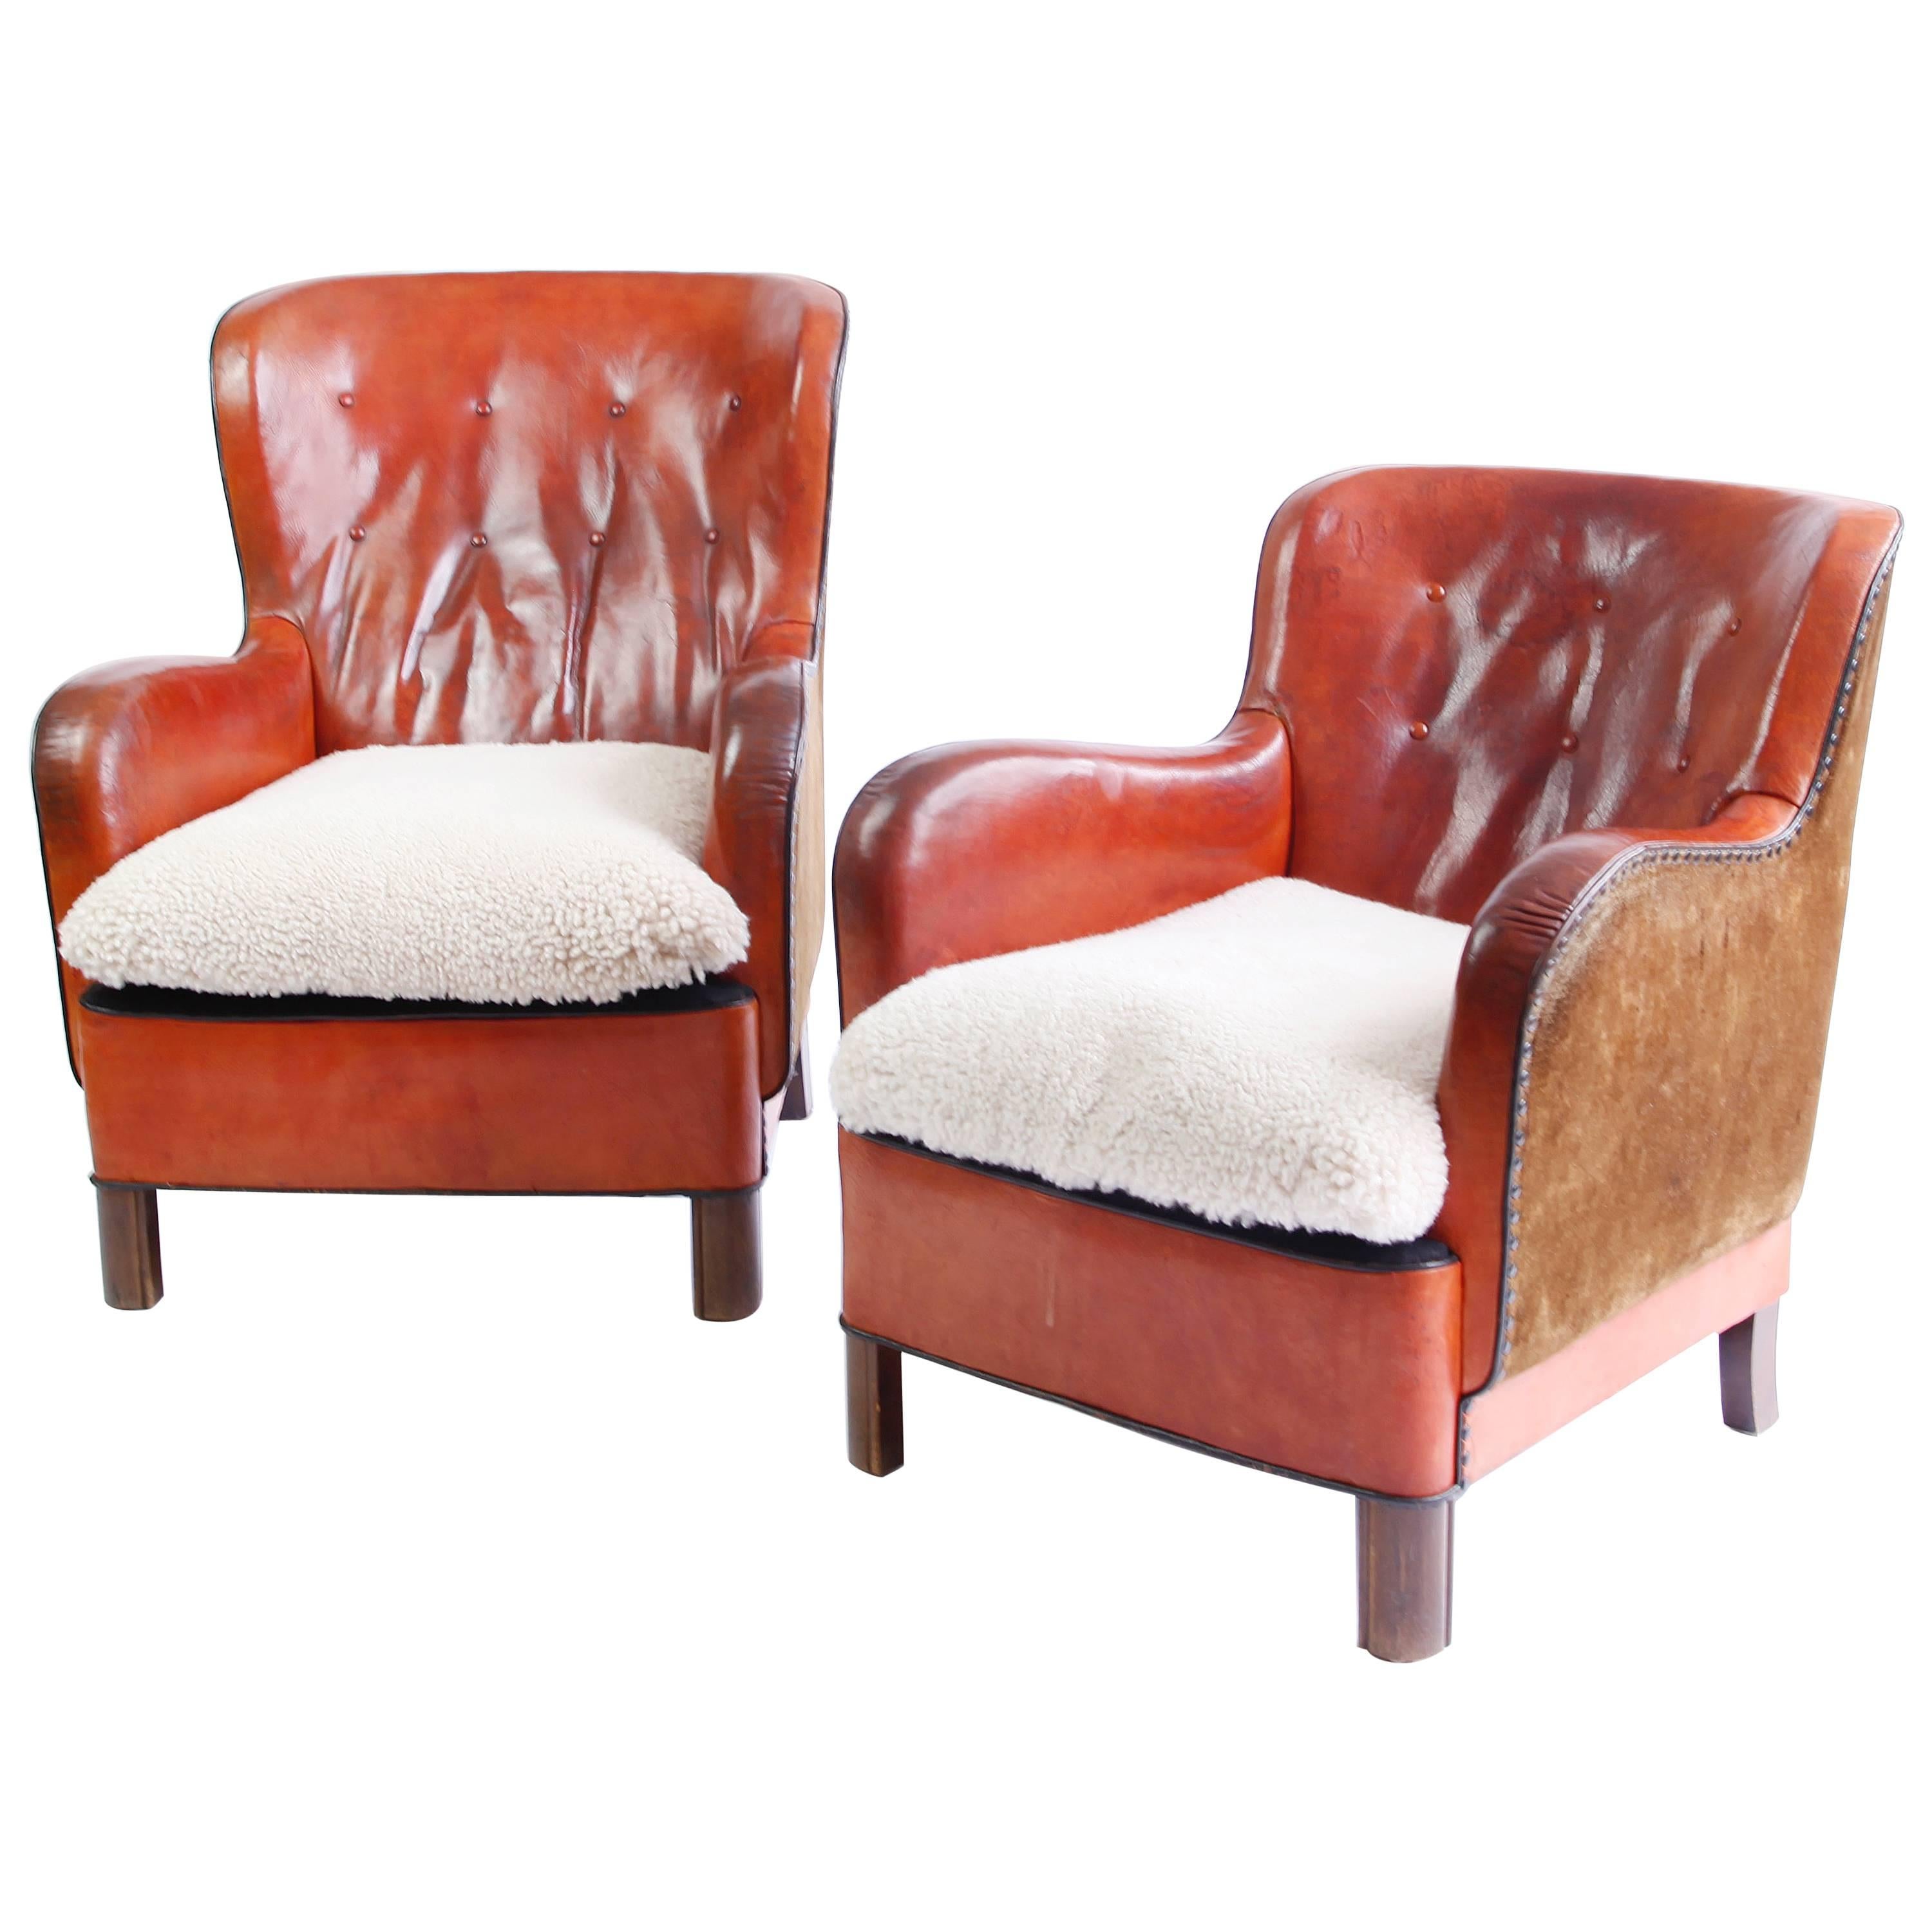 Pair of 1930s Danish Leather Lounge Chairs